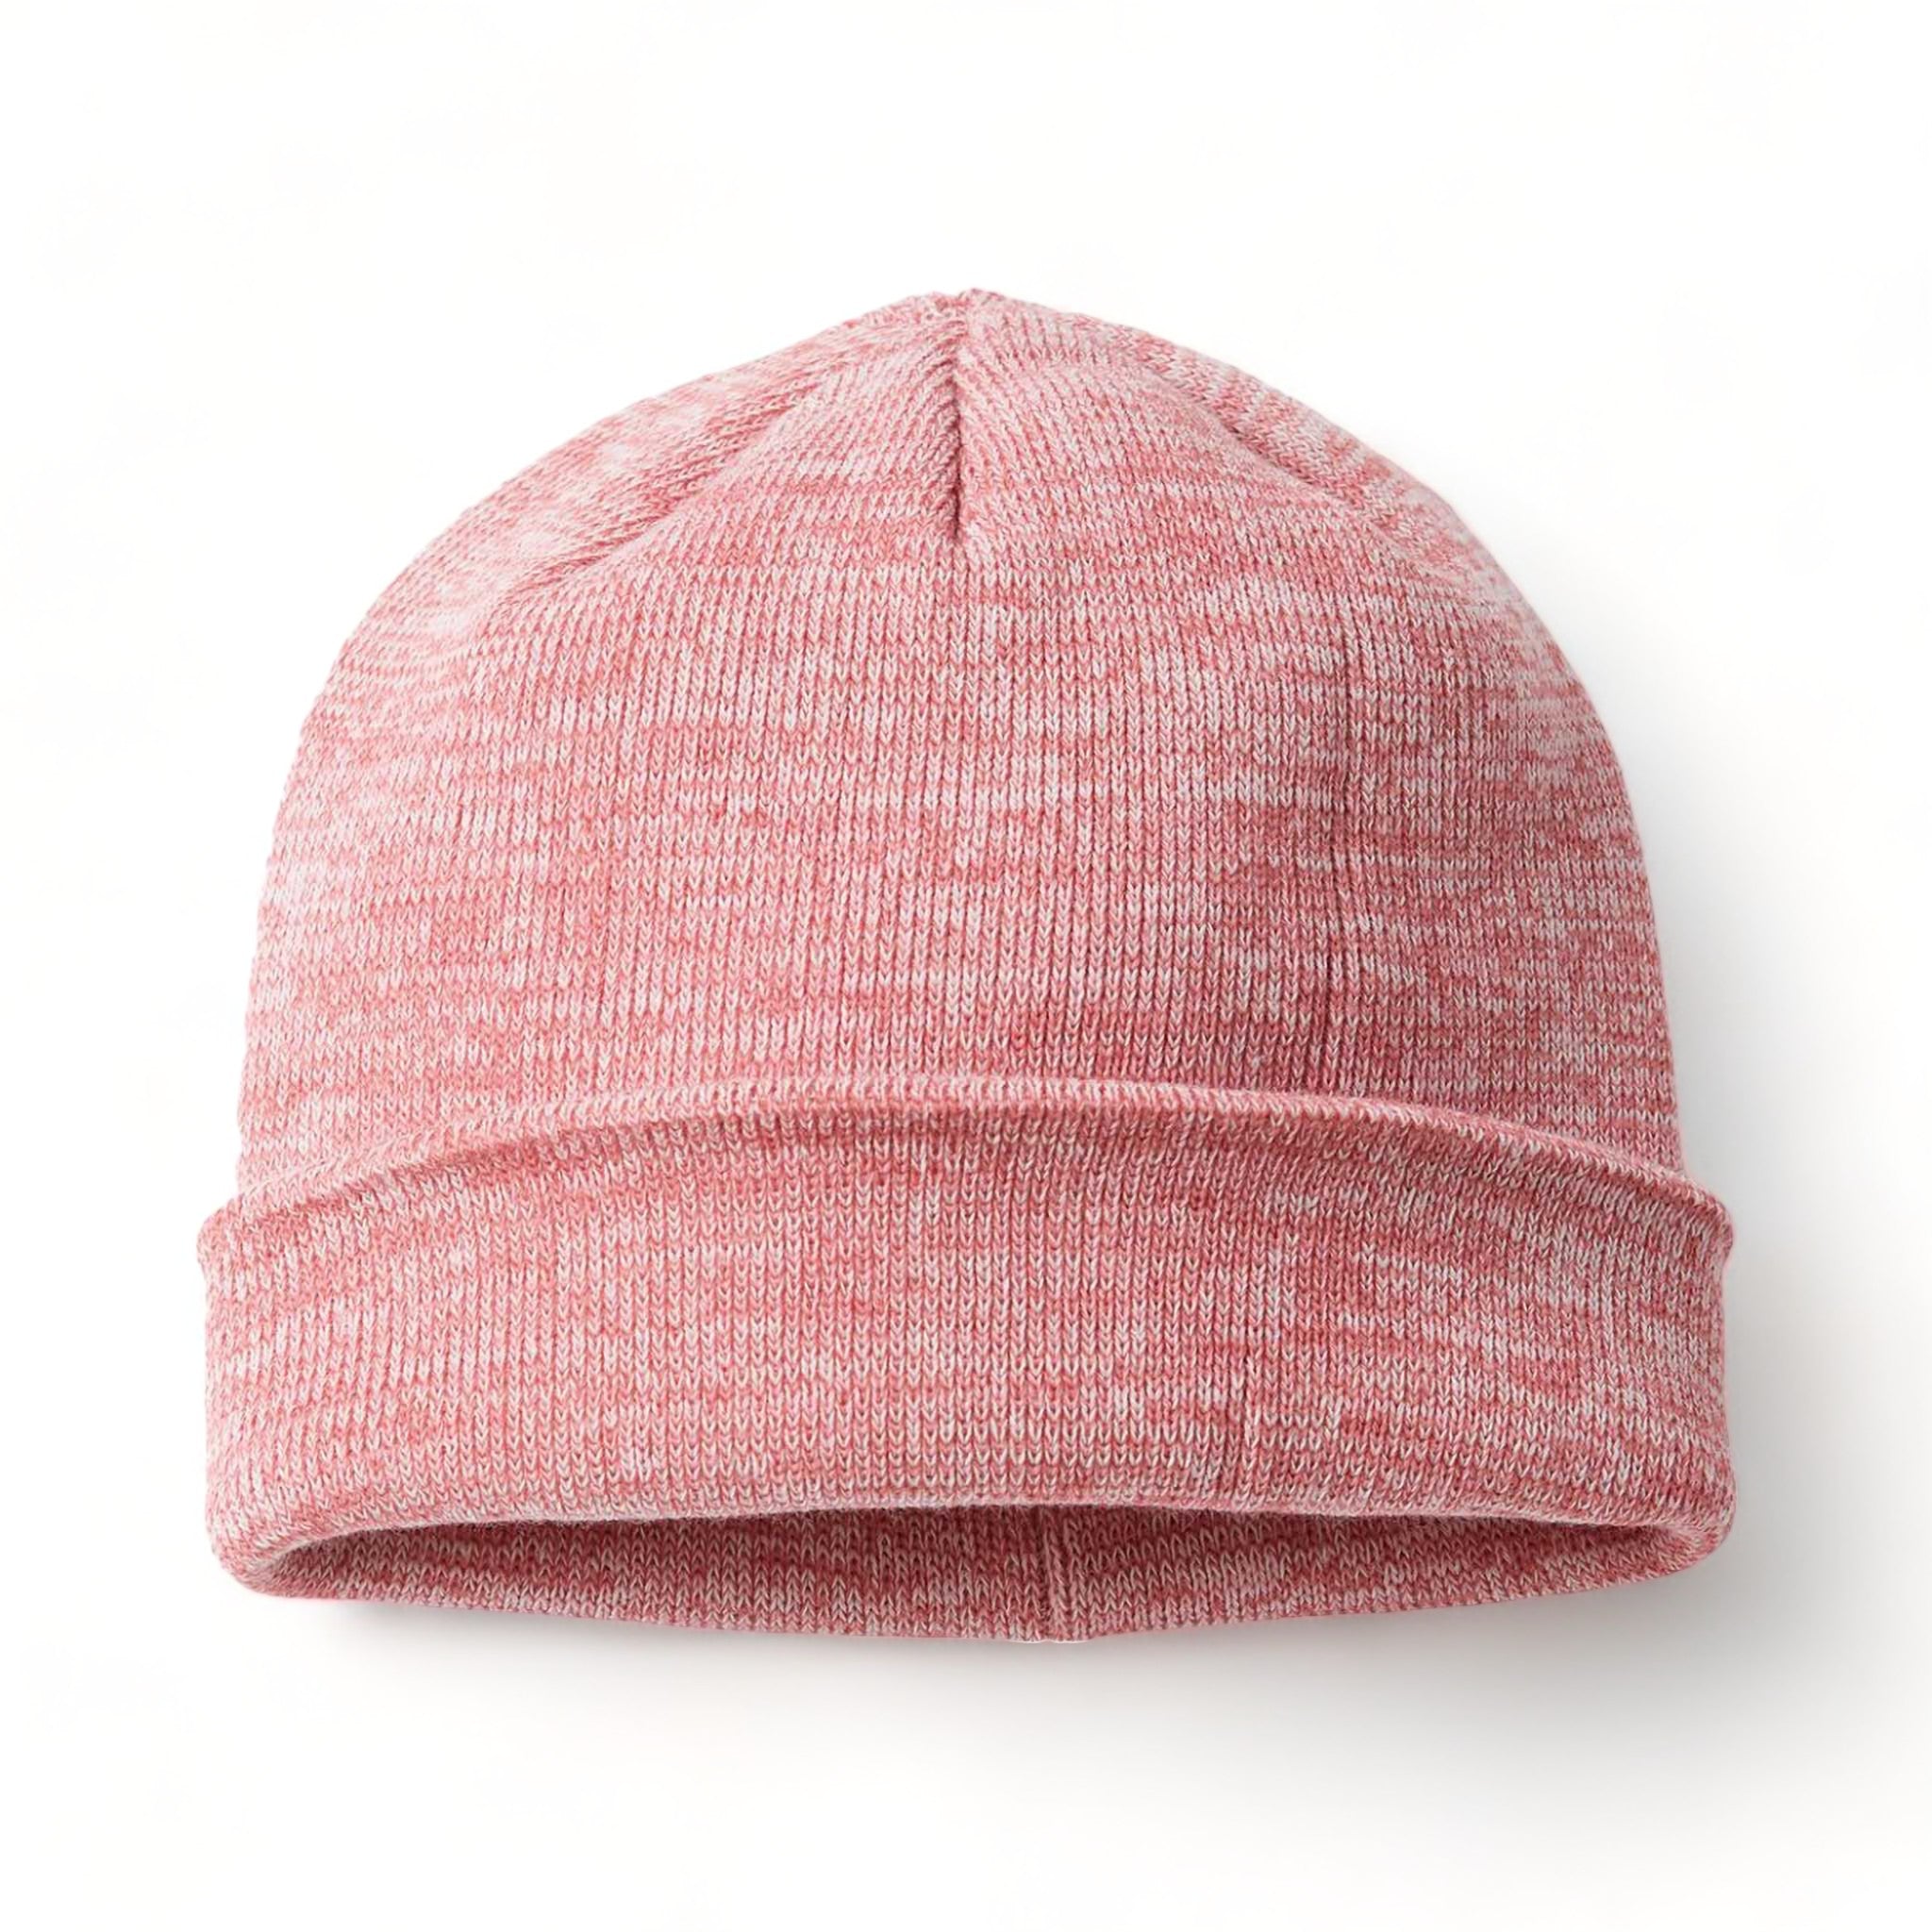 Front view of Richardson 130 custom hat in pink, grey and light pink